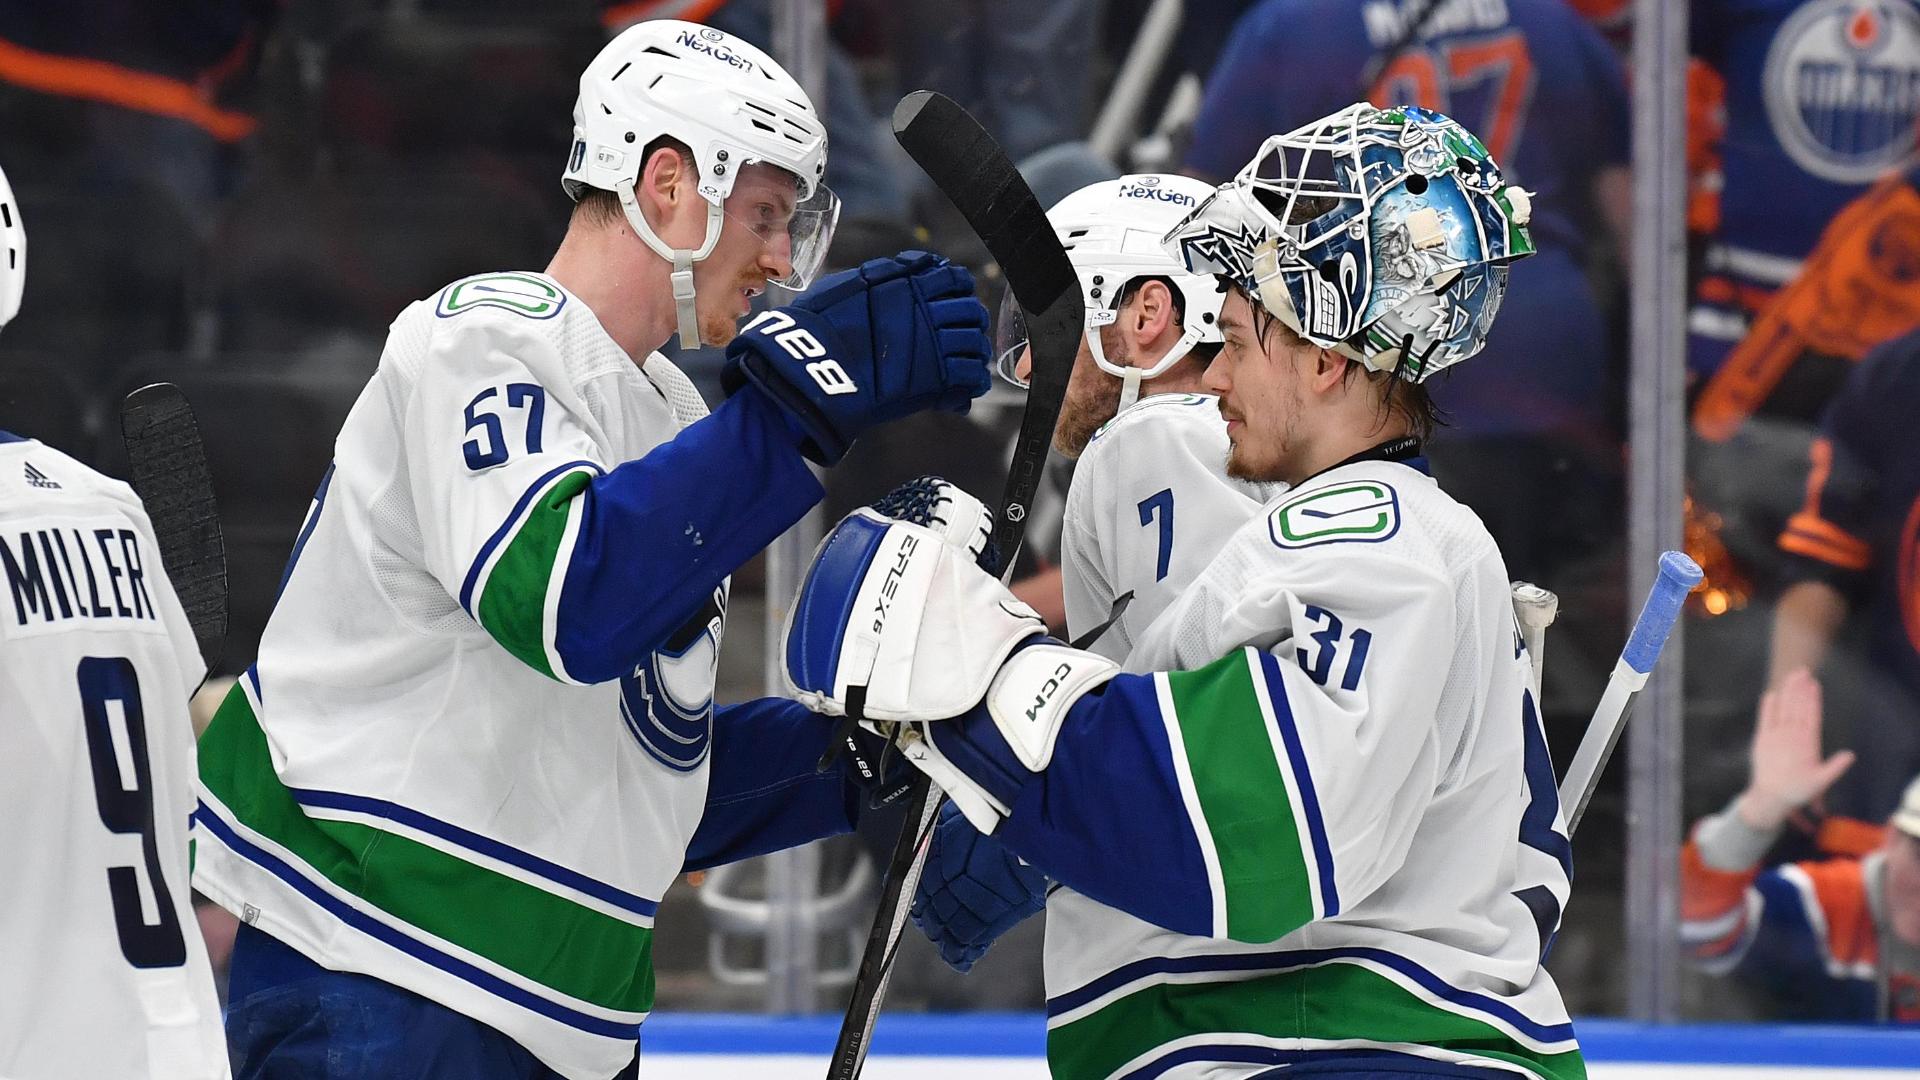 Canucks fend off Oilers in closing moments to take 2-1 series lead